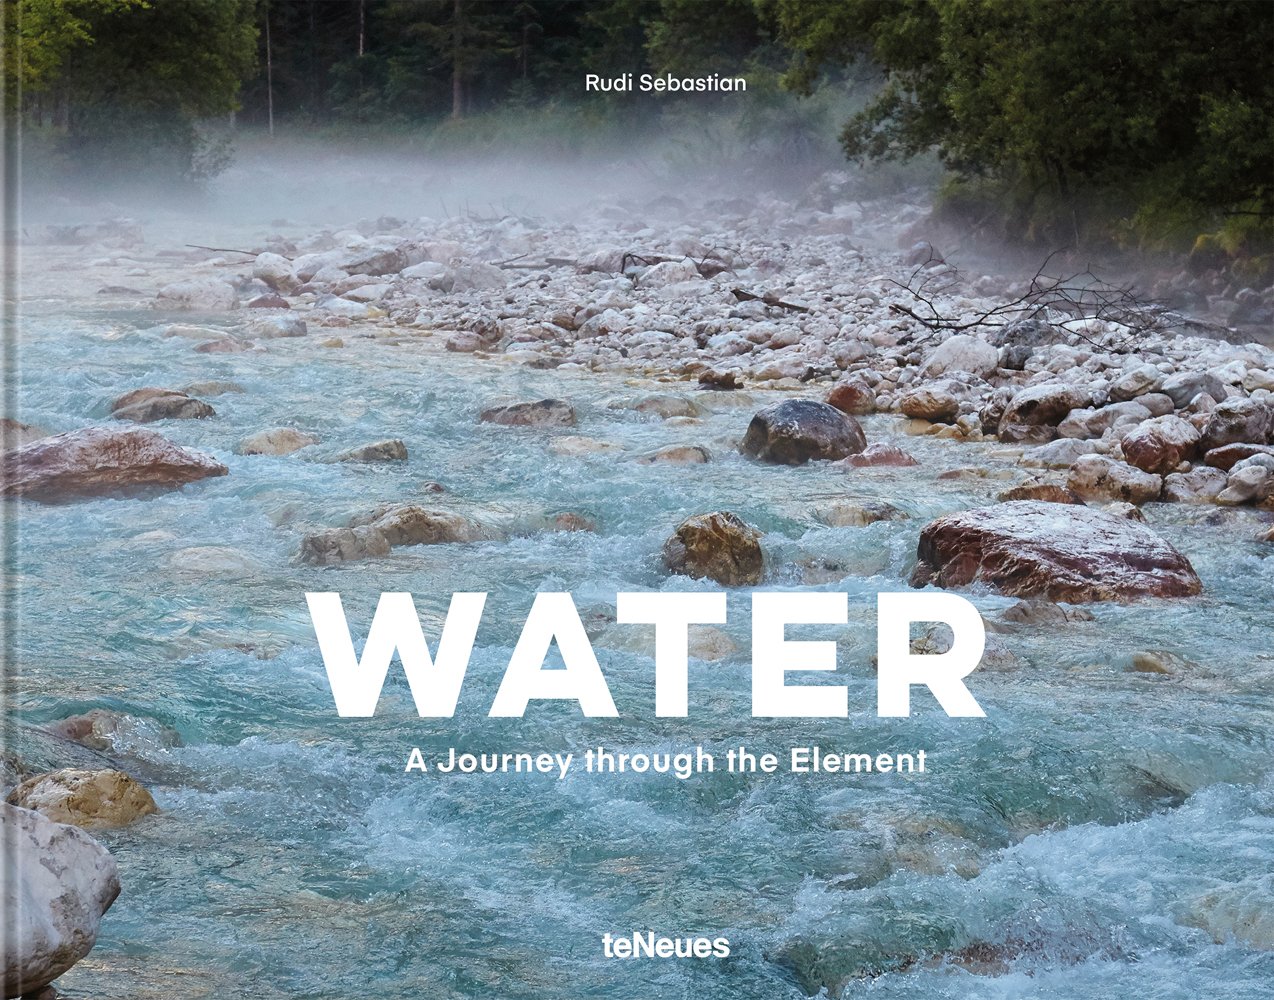 Water running over rocks in river, steam in distance, 'WATER A Journey through the Element', in white font below.